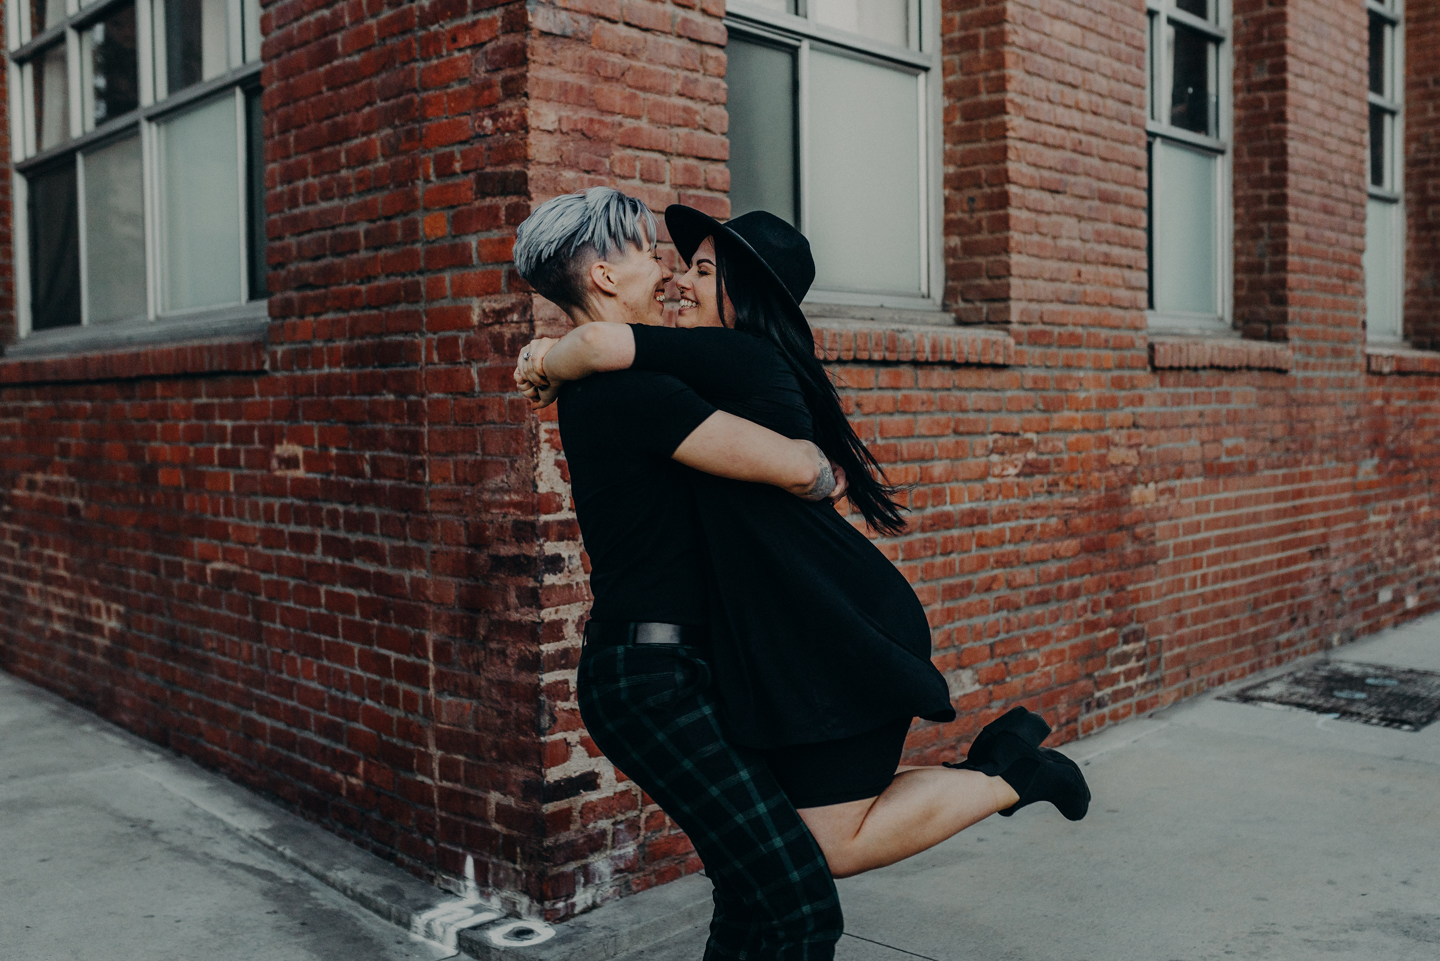 queer wedding photographer in los angeles - lesbian engagement session los angeles - isaiahandtaylor.com-037.jpg